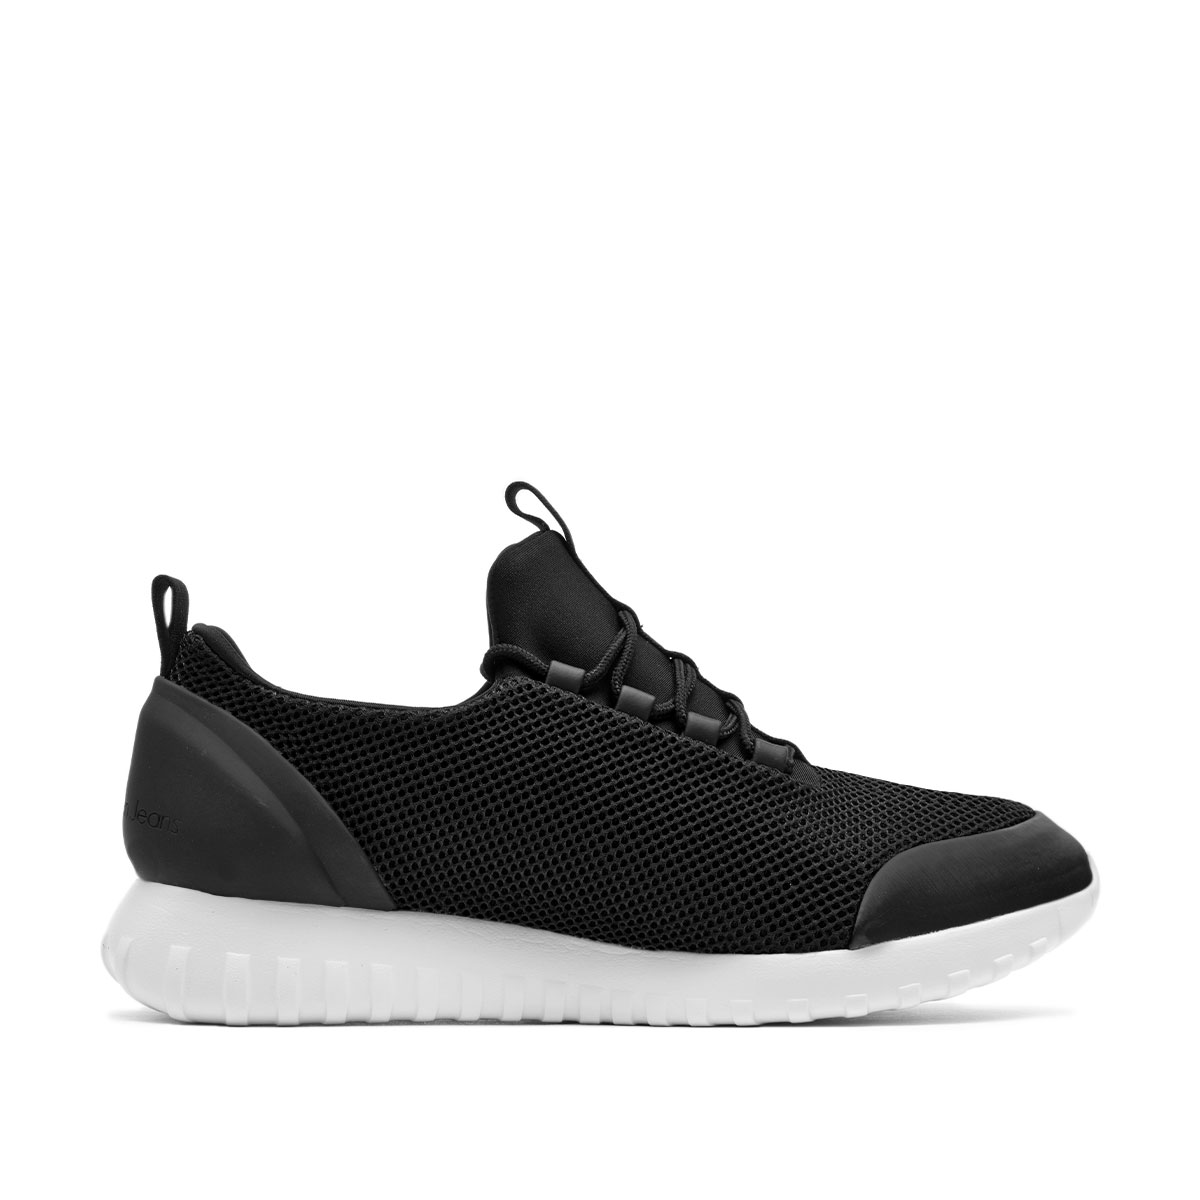 Calvin Klein Runner Sneaker Lace Up  YM0YM00085-BDS